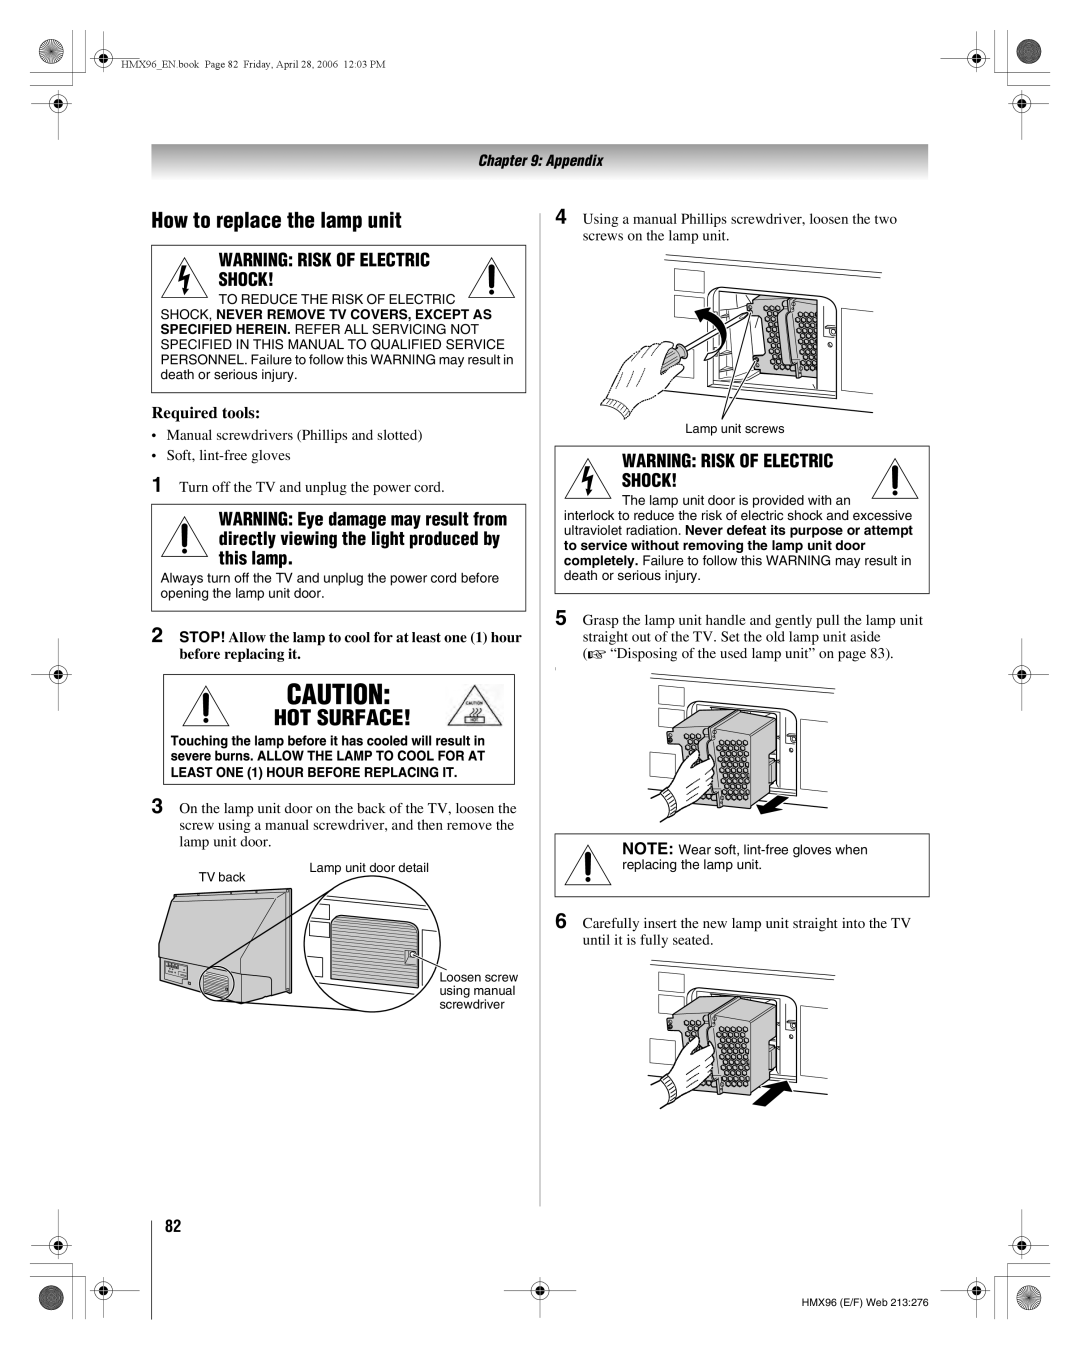 Toshiba 50HMX96, 56HMX96 manual How to replace the lamp unit, Required tools 